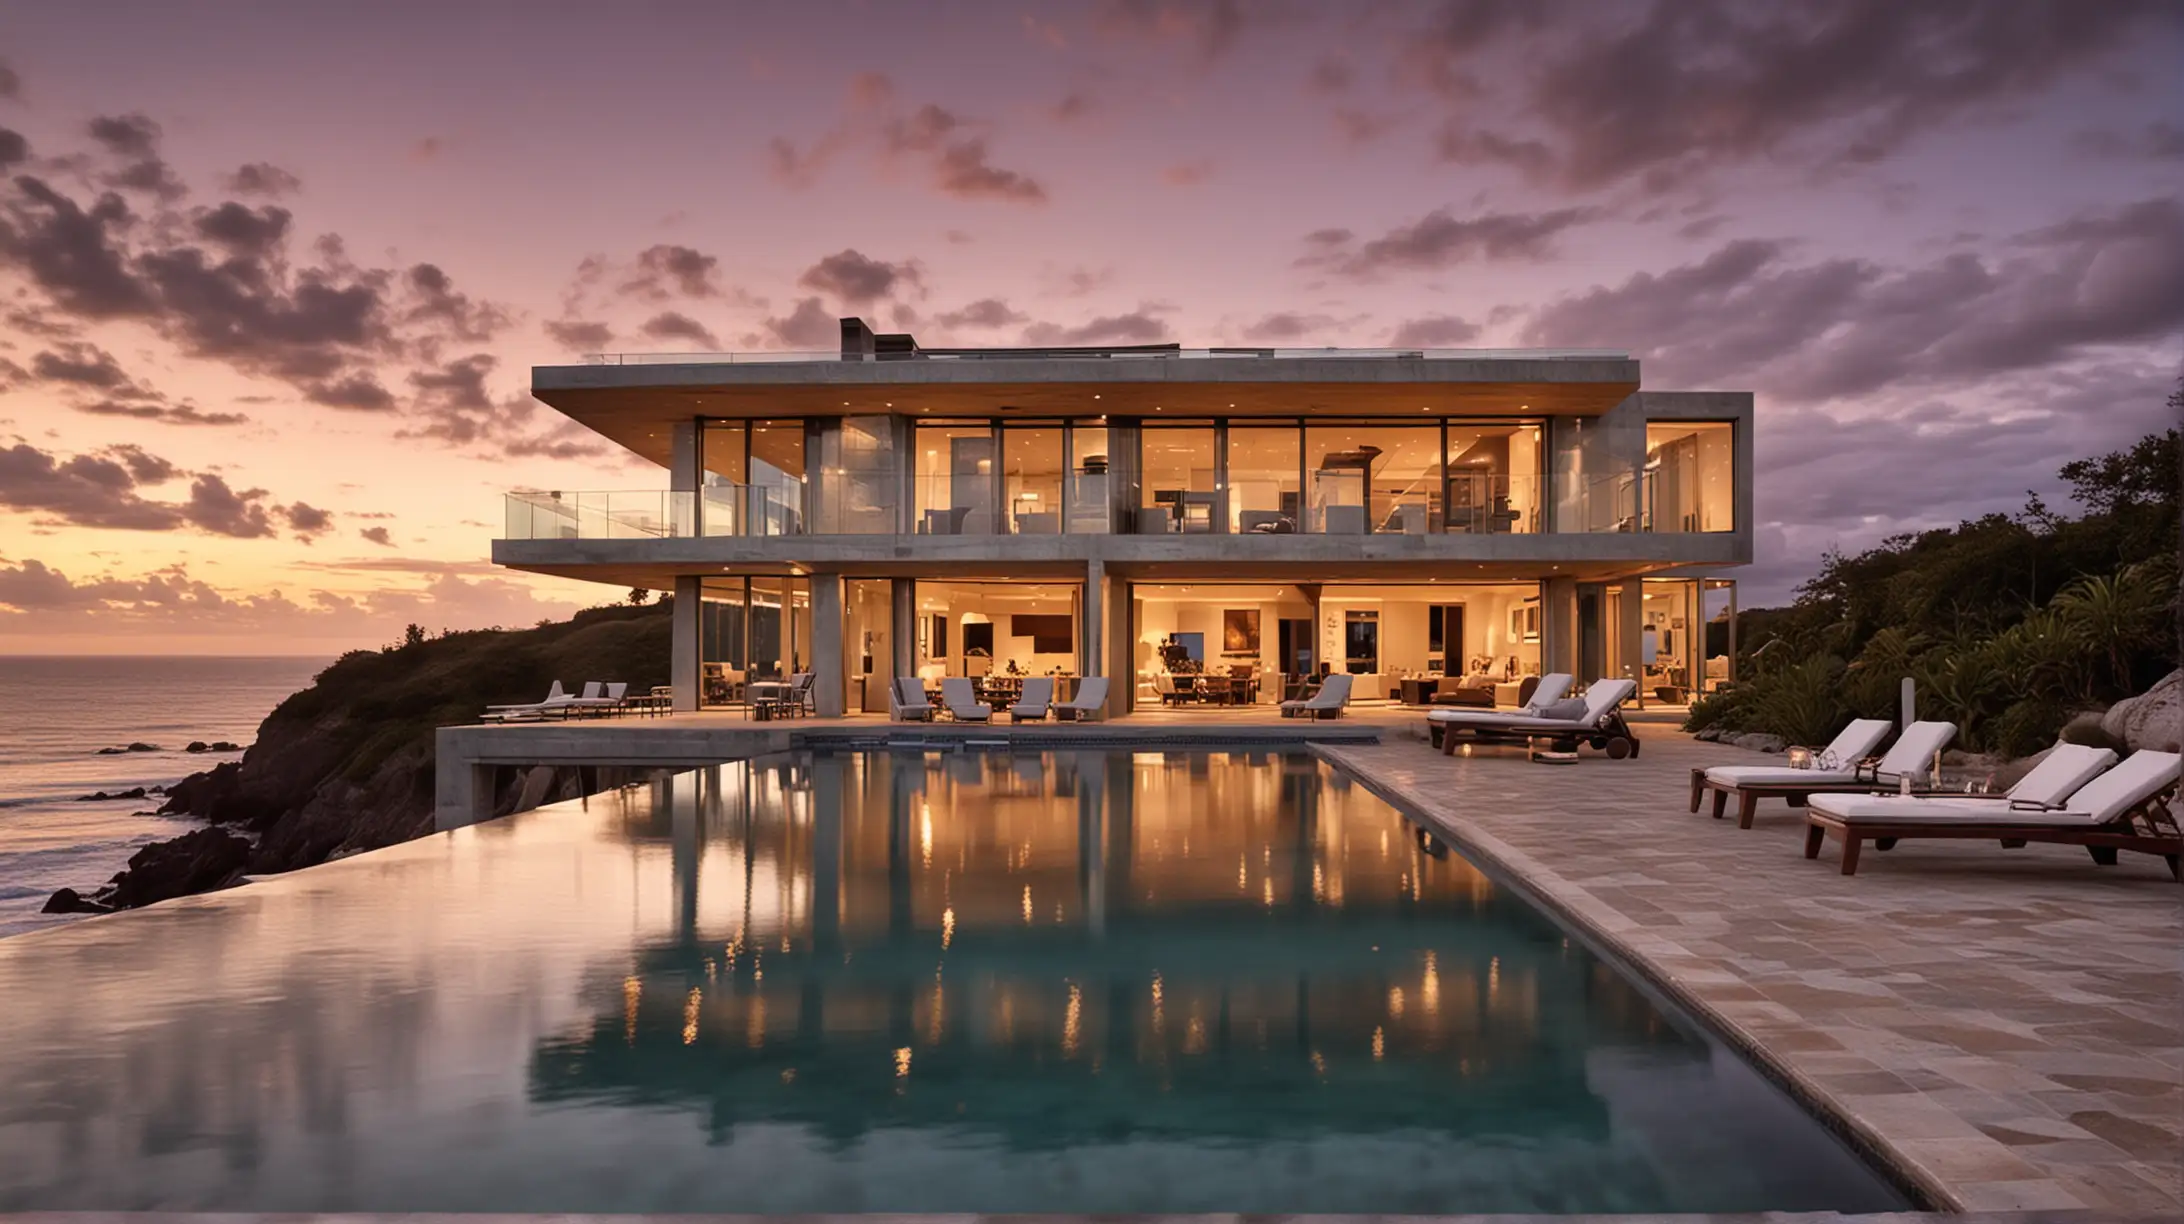 I would like to get a picture of an ocean front contemporary vacation home with an infinity pool and stunning outside living area at sunset.